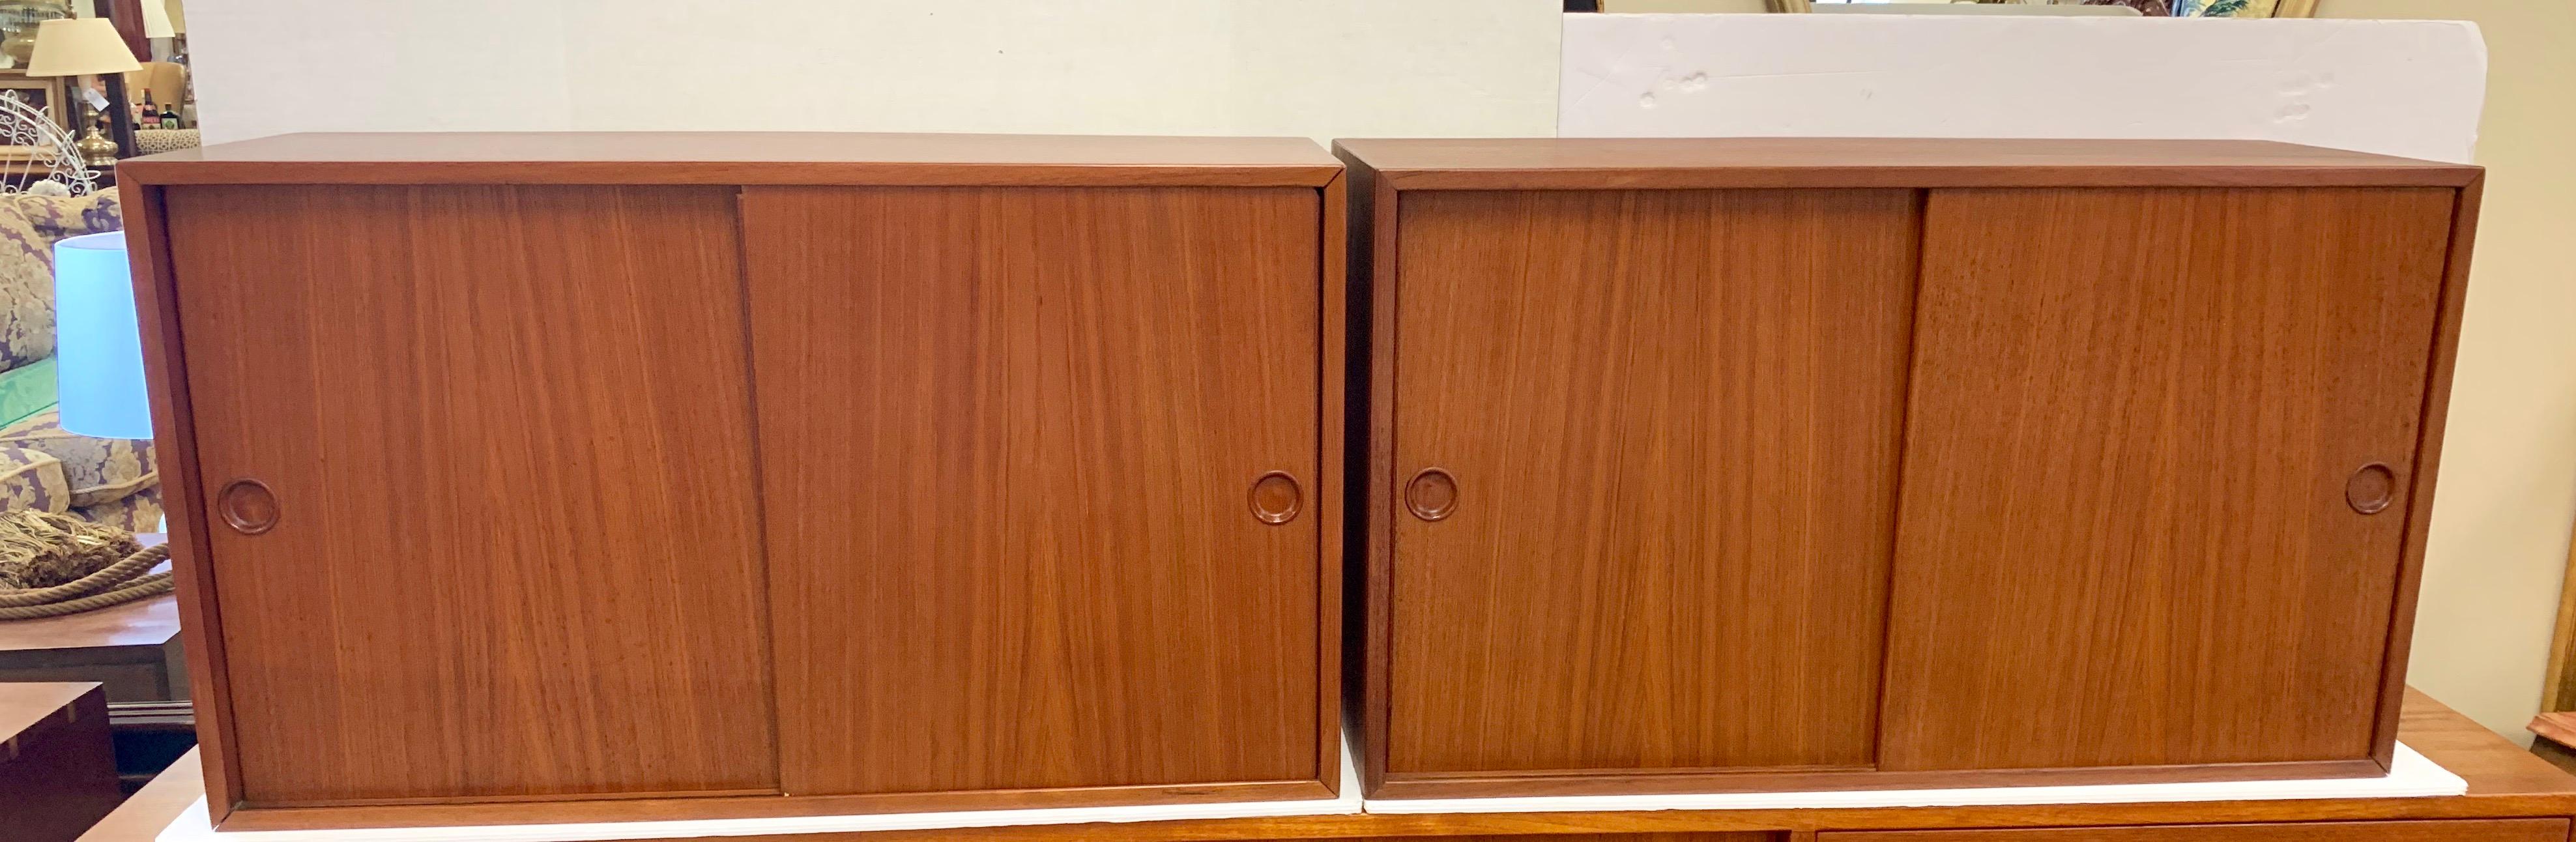 Mid century pair of Hans Wegner teak wall mounted sideboard cabinets. Ready to mount on your wall.
Iconic Scandinavian modern pair of matching sideboards for on great price. Ultra rare and coveted.
Features felt sliding drawers and other shelving -